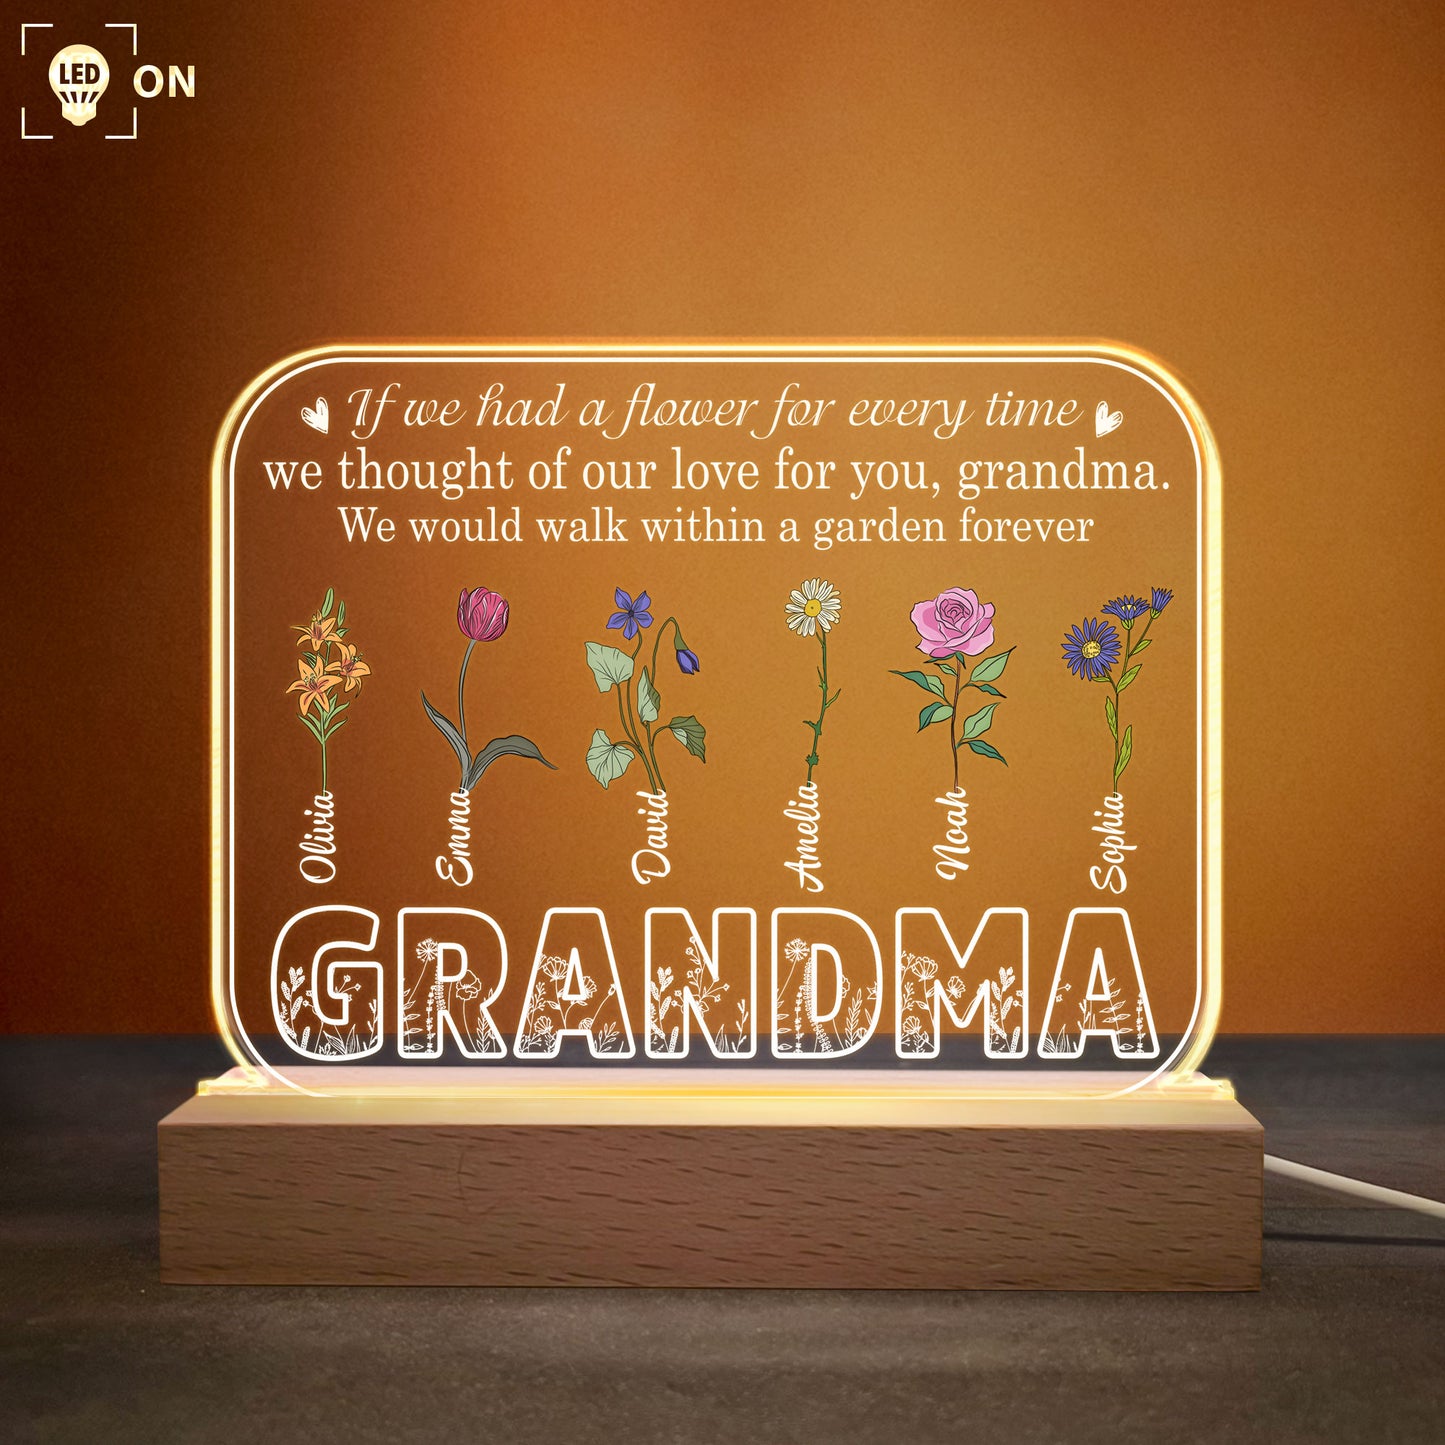 Walk Within A Garden Forever - Personalized 3D LED Light Wooden Base